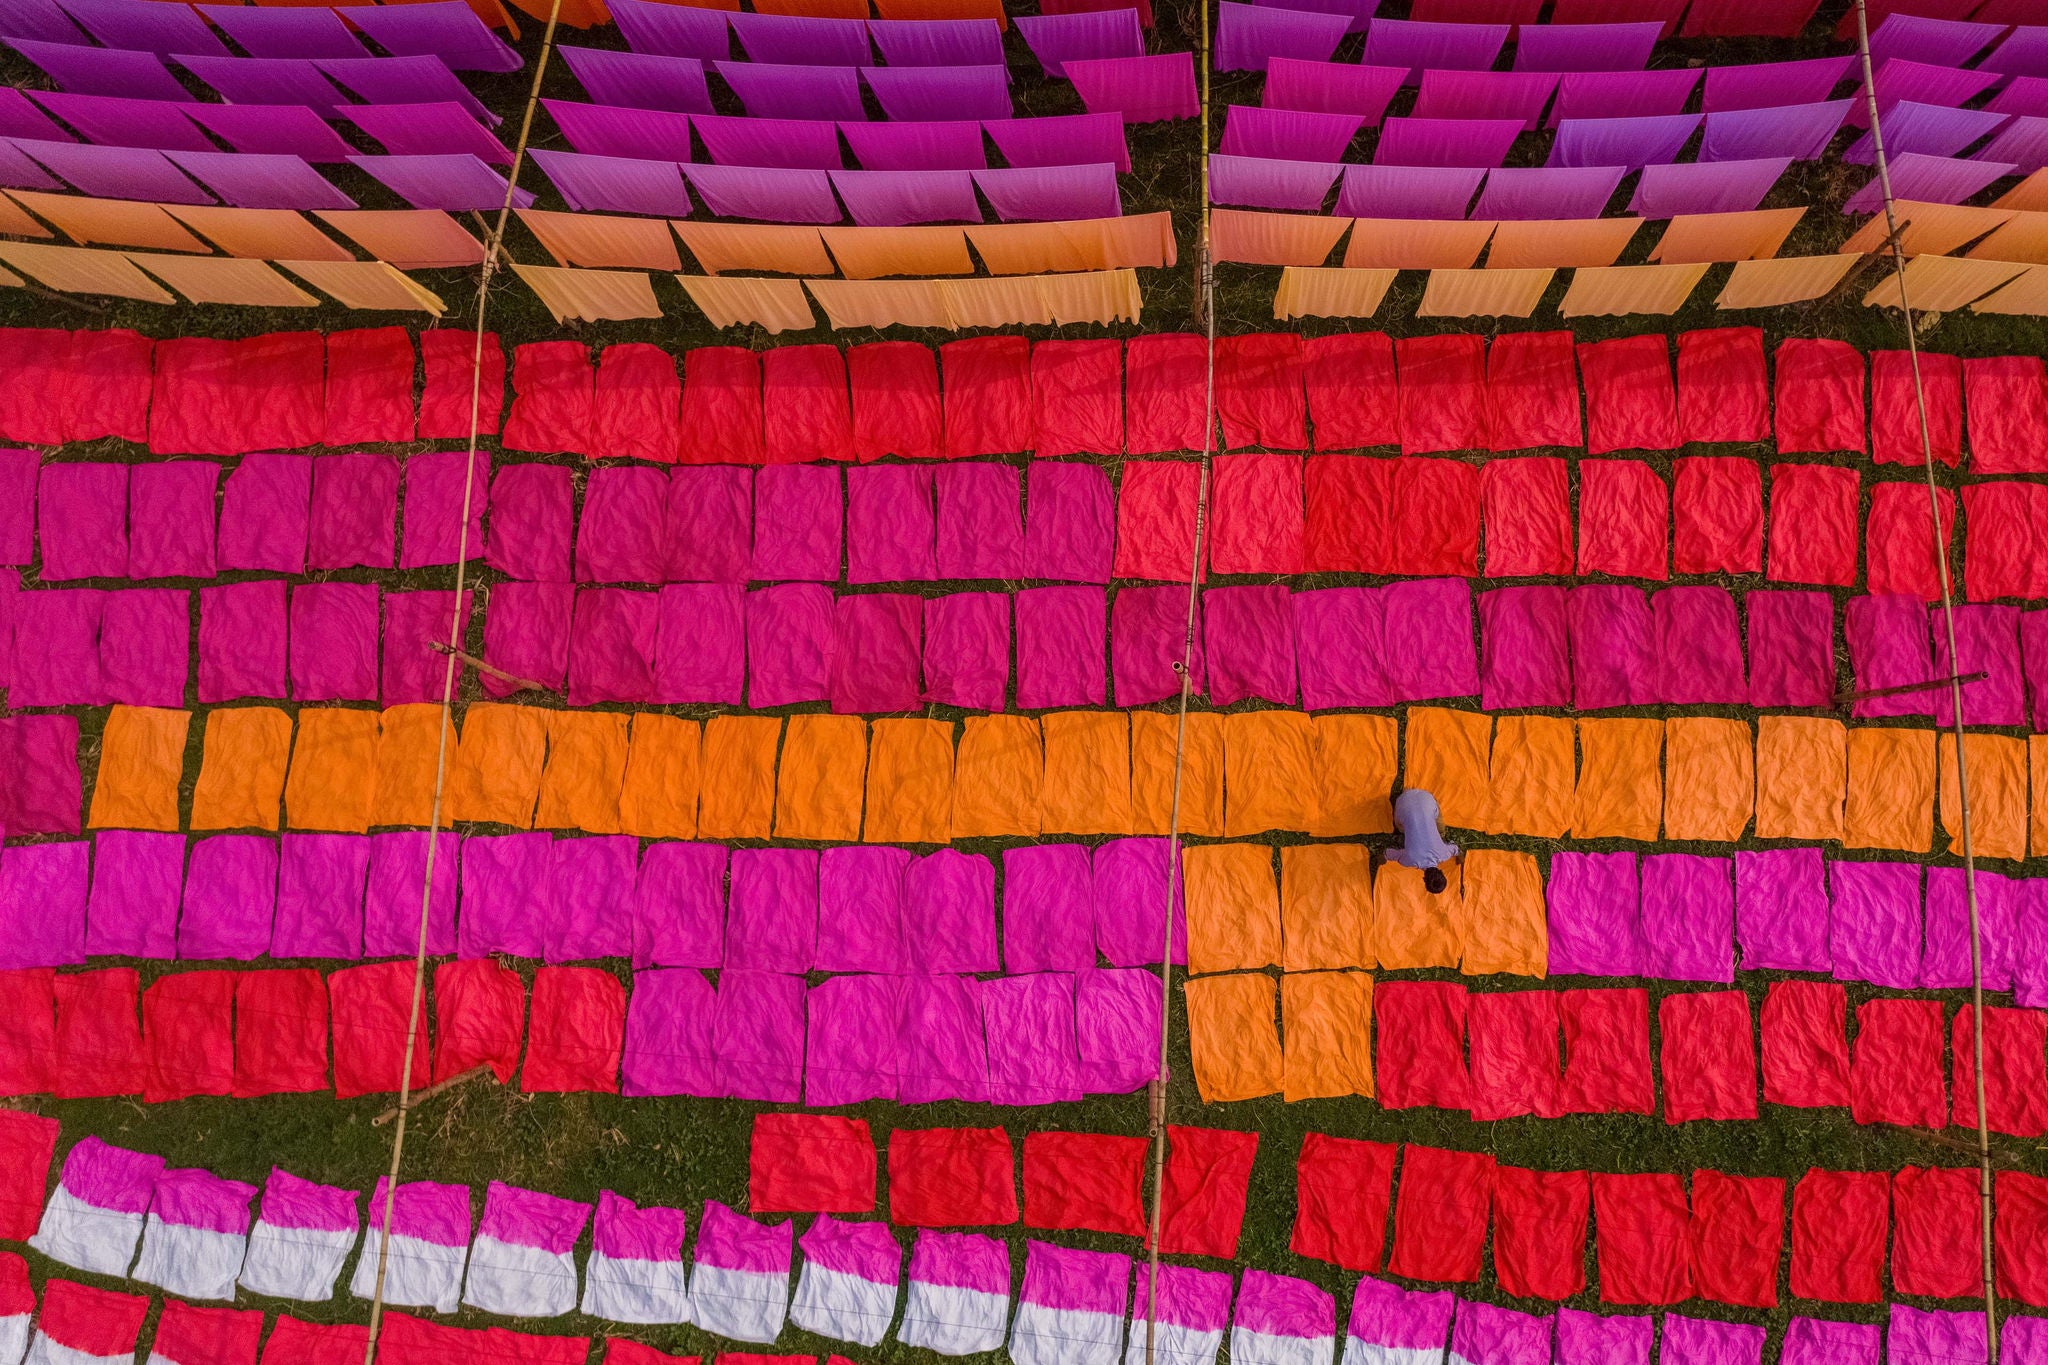 Ariel view of a man working in a public laundry